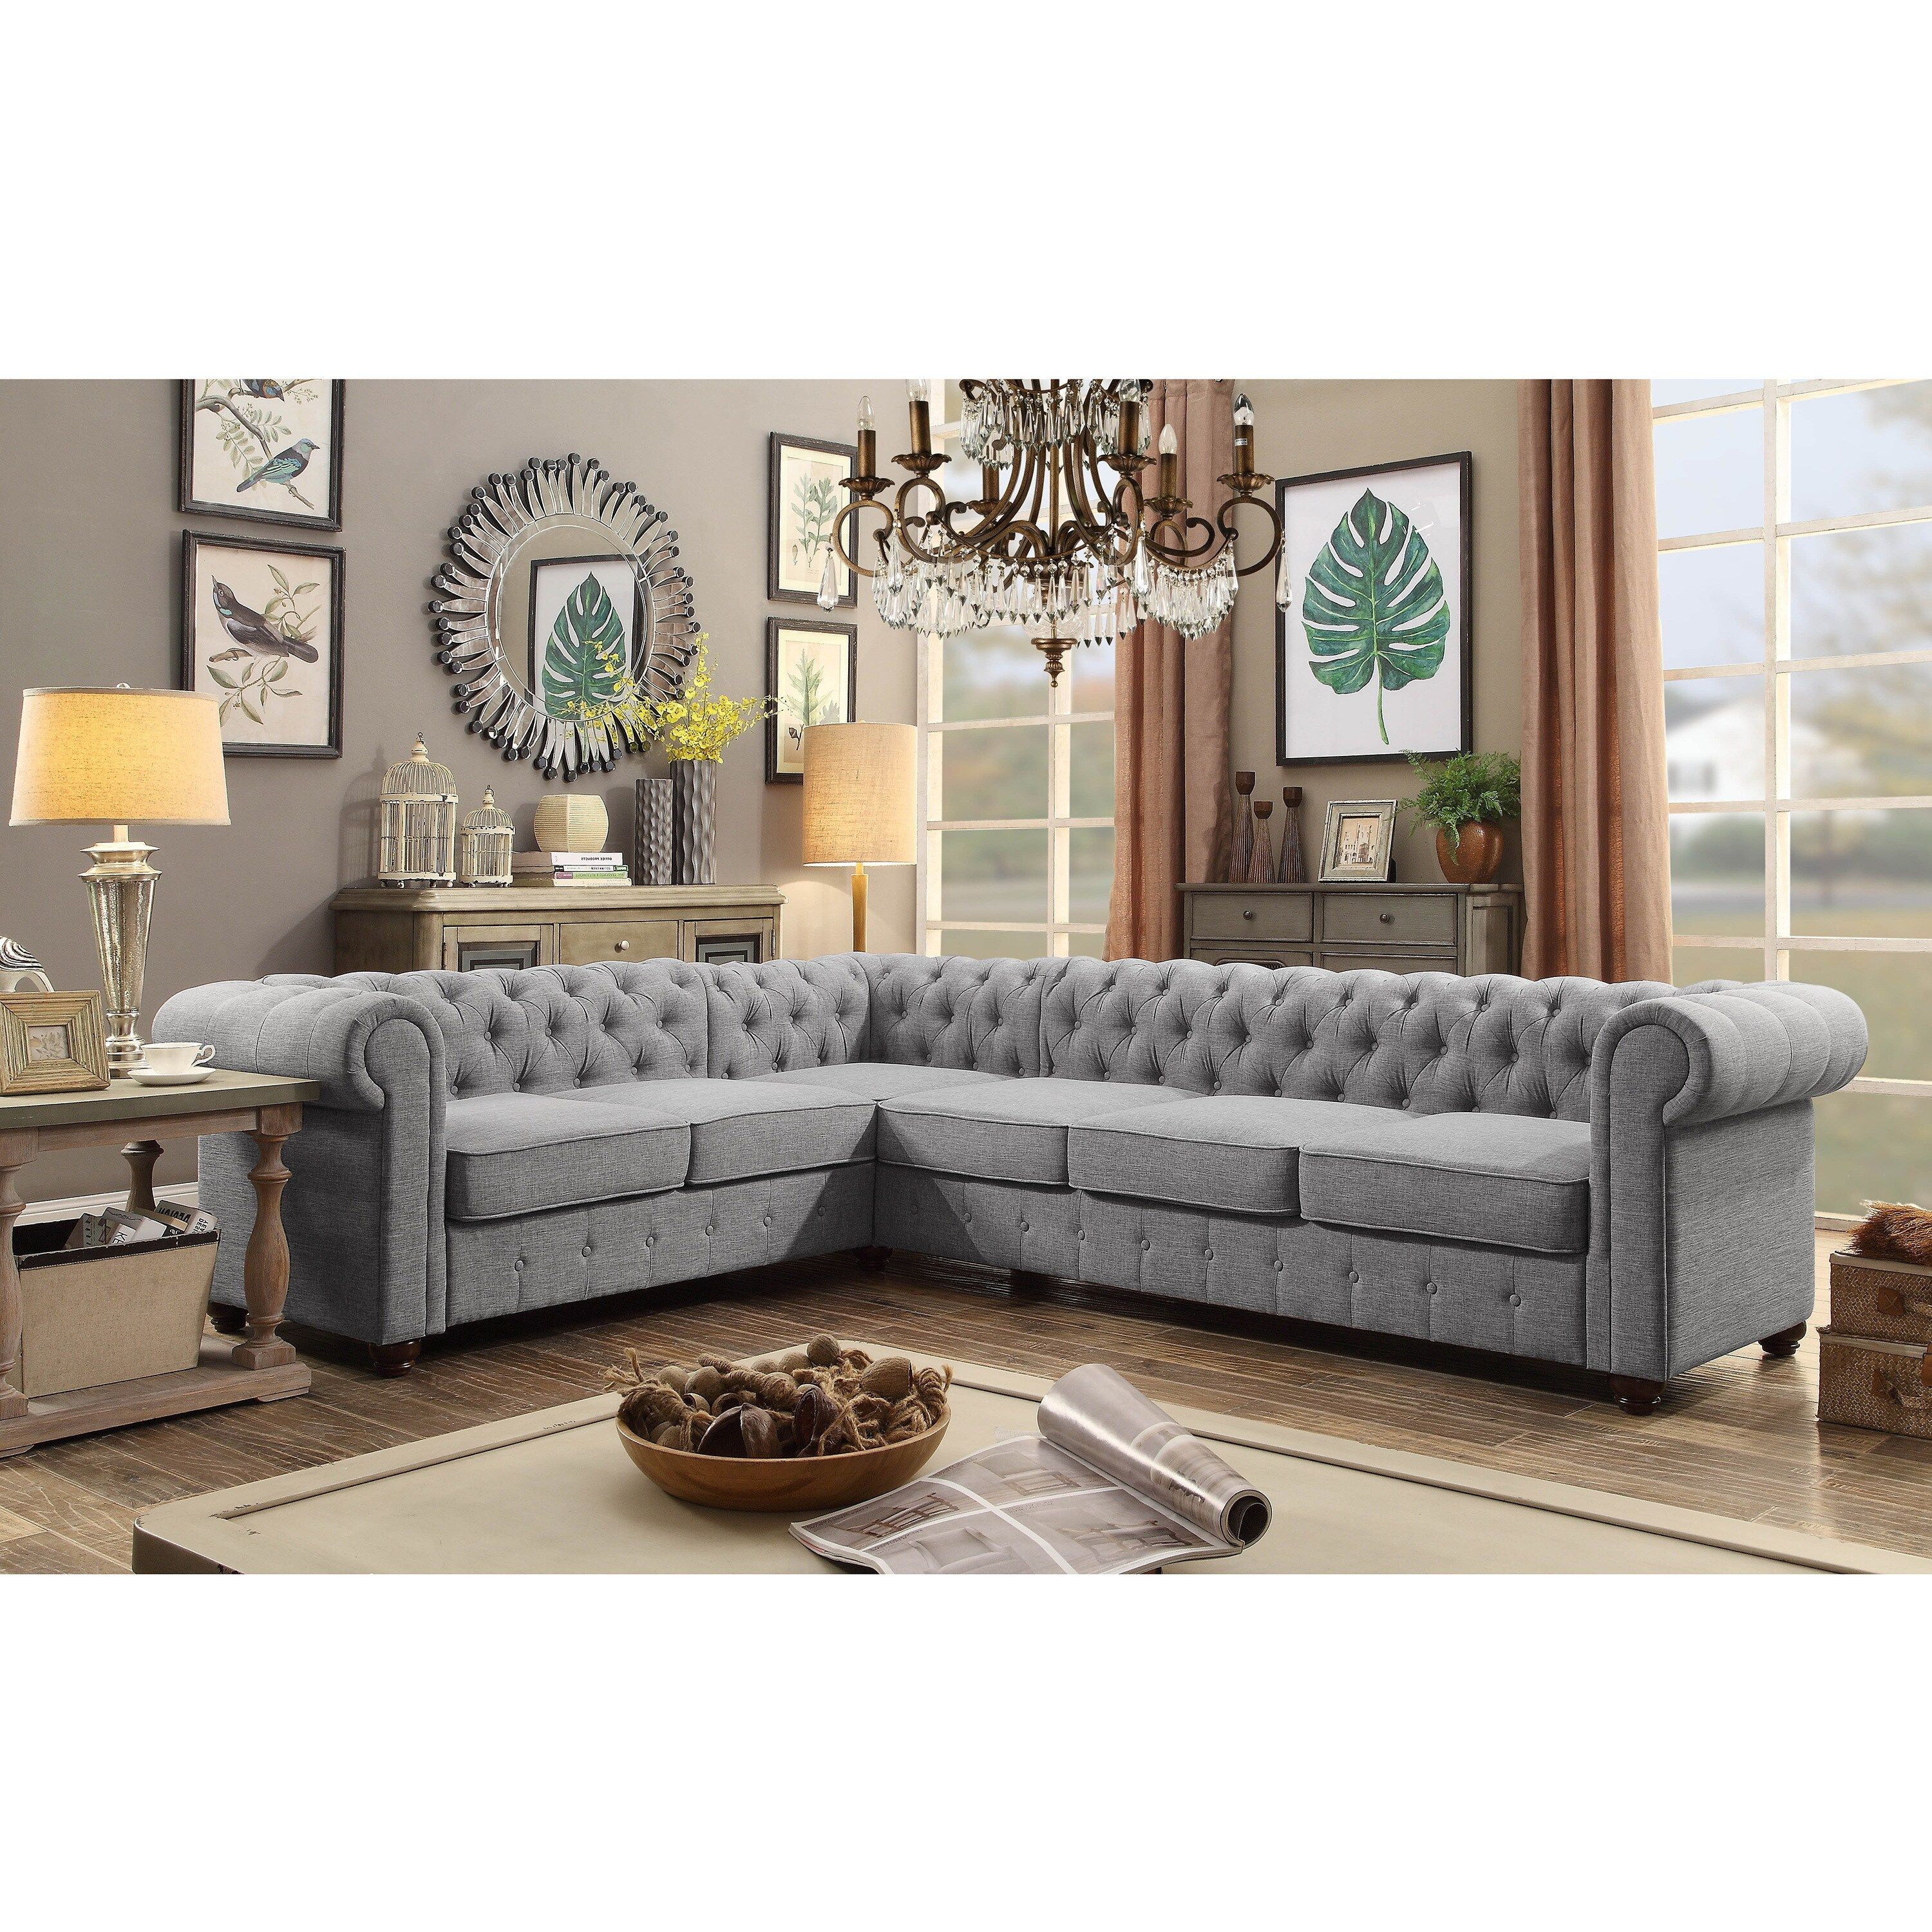 Moser Bay Garcia Furniture Linen 6 Seat Sectional Sofa Set – On Sale – –  12033154 With 6 Seater Sectional Couches (View 17 of 20)